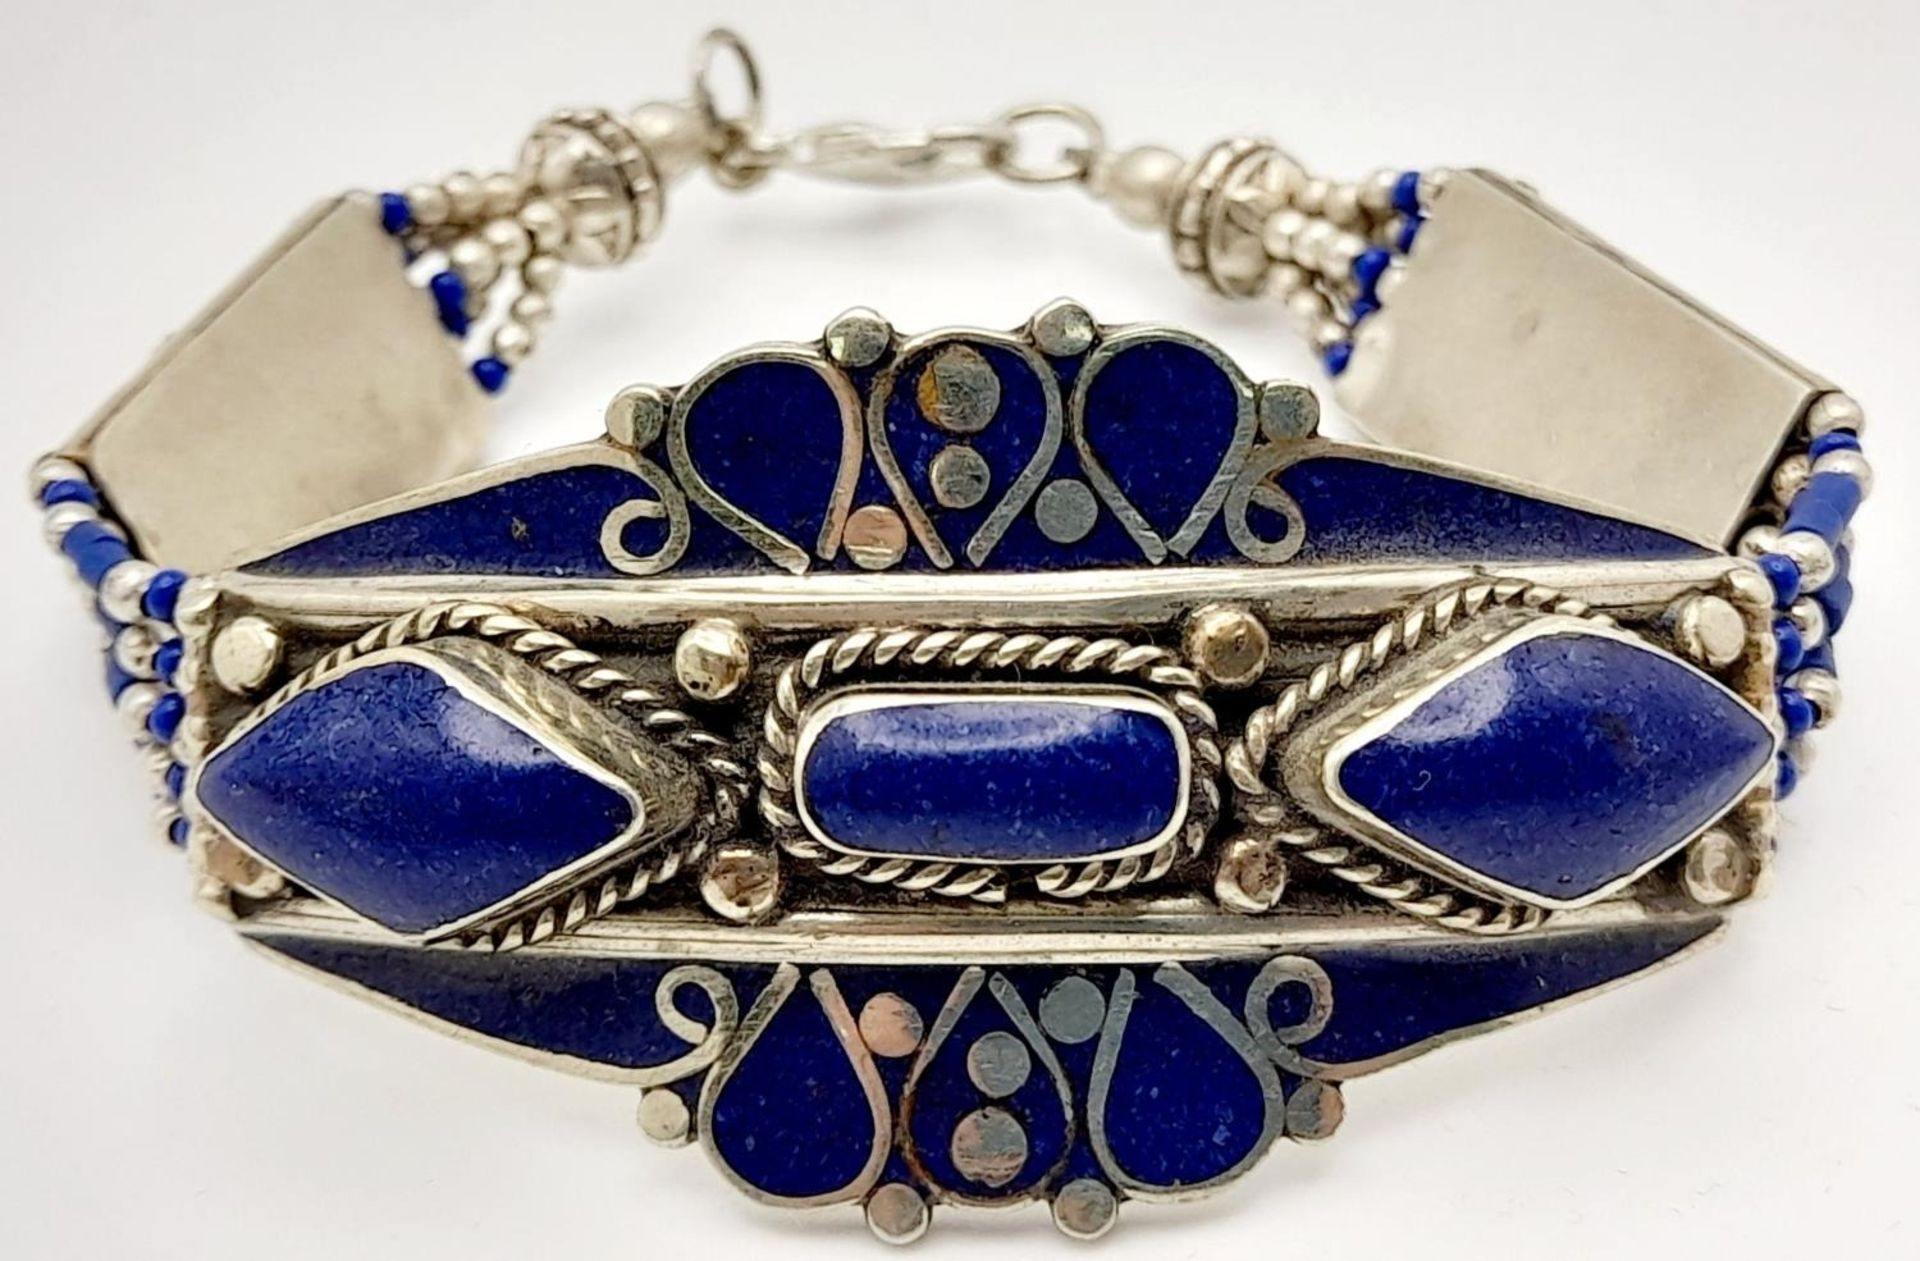 A tribal, wonderfully crafted, white metal and lapis lazuli necklace and bracelet set in a - Bild 5 aus 6